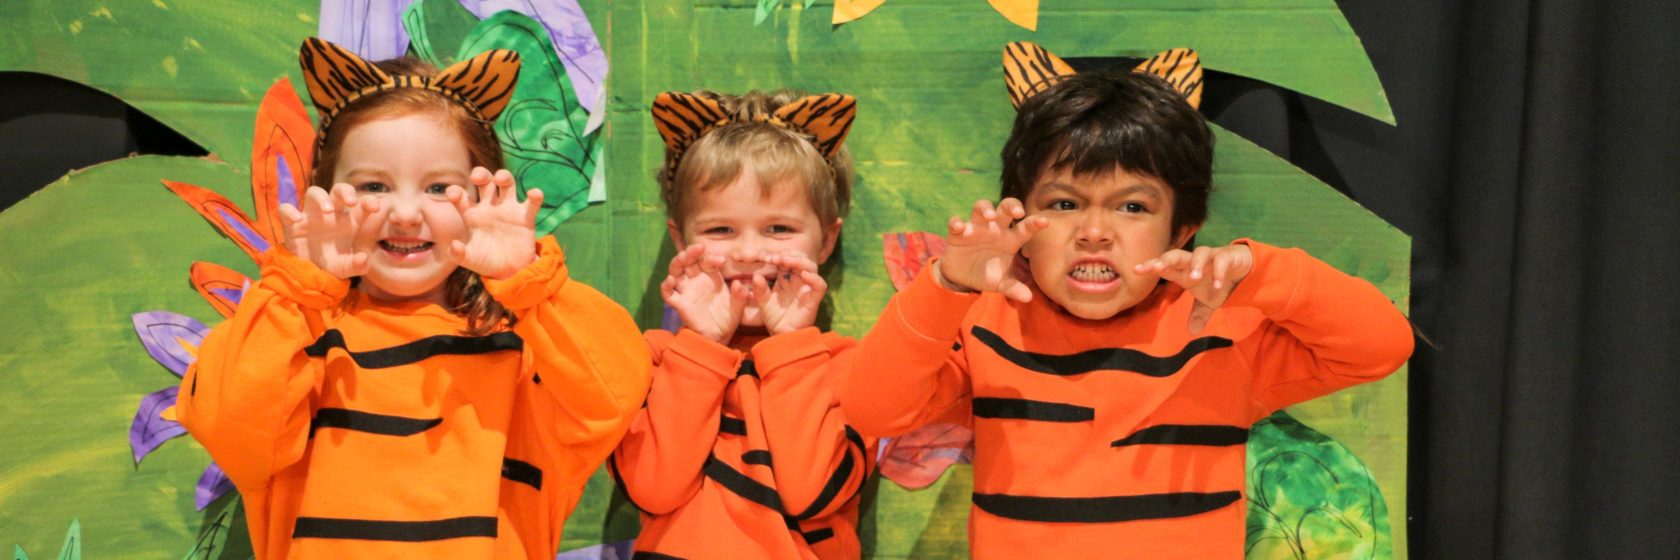 A group of children dressed as tigers posing on stage.